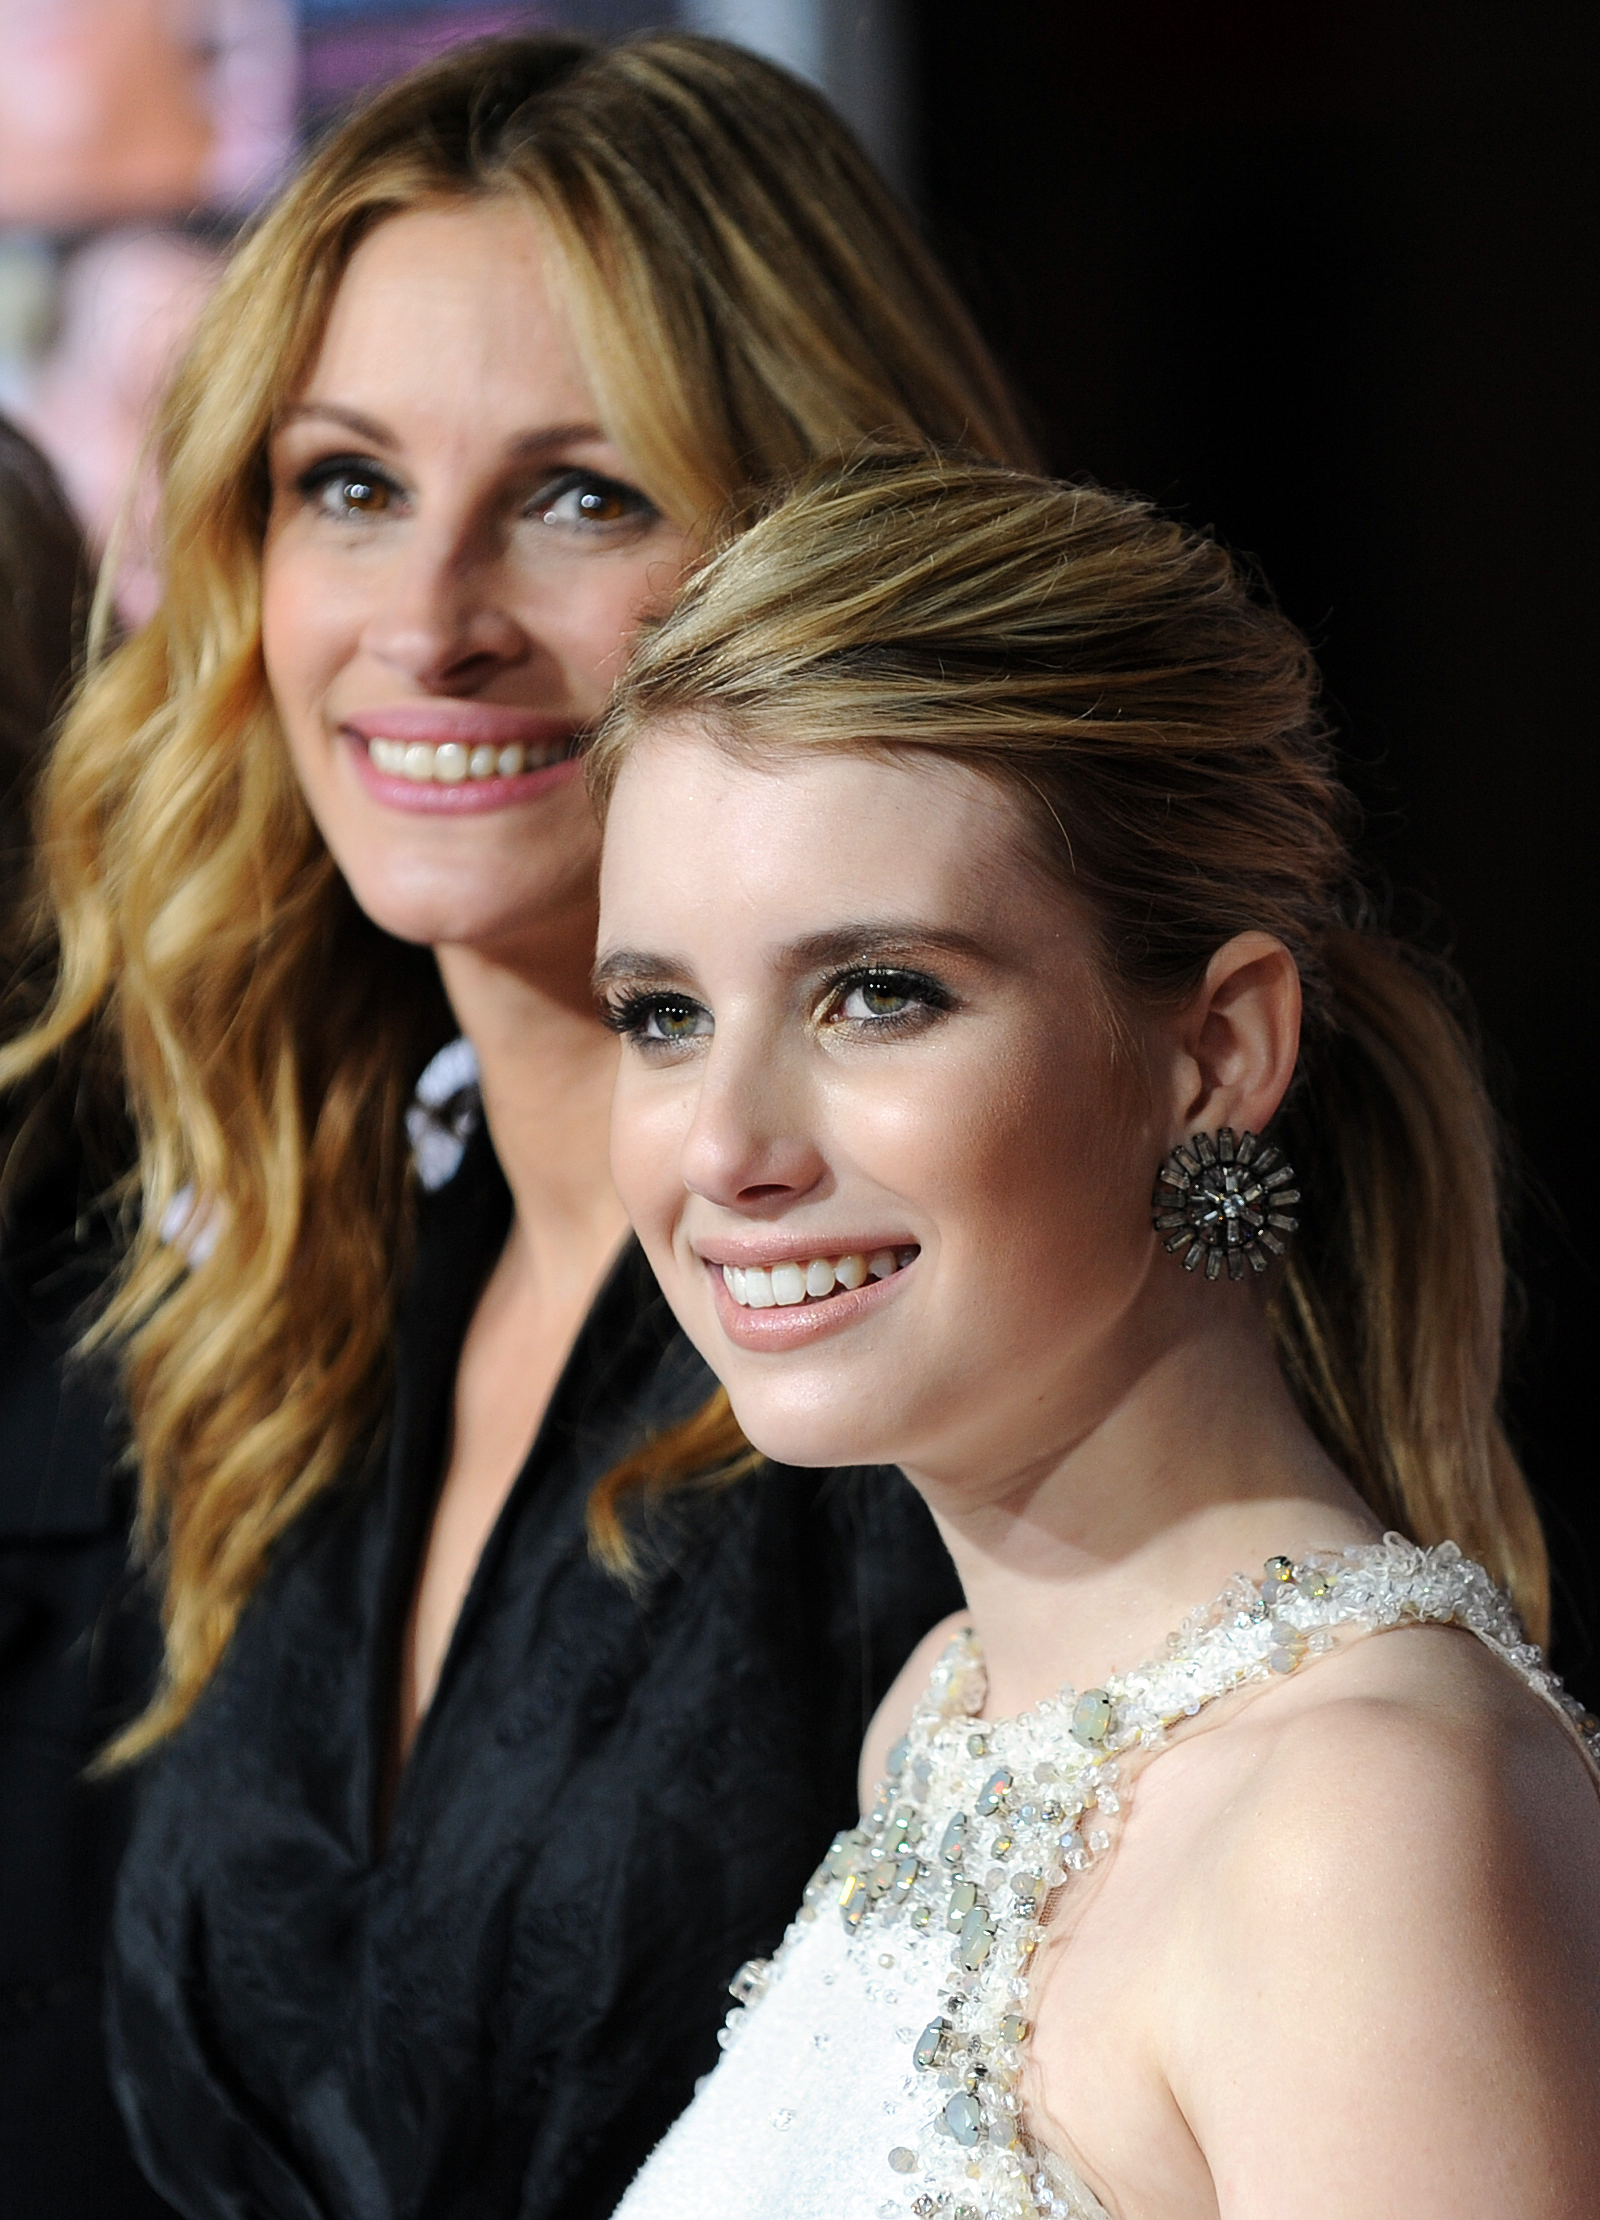 Julia and Emma Roberts at the premiere of "Valentine's Day" in Los Angeles, California on February 8, 2010 | Source: Getty Images